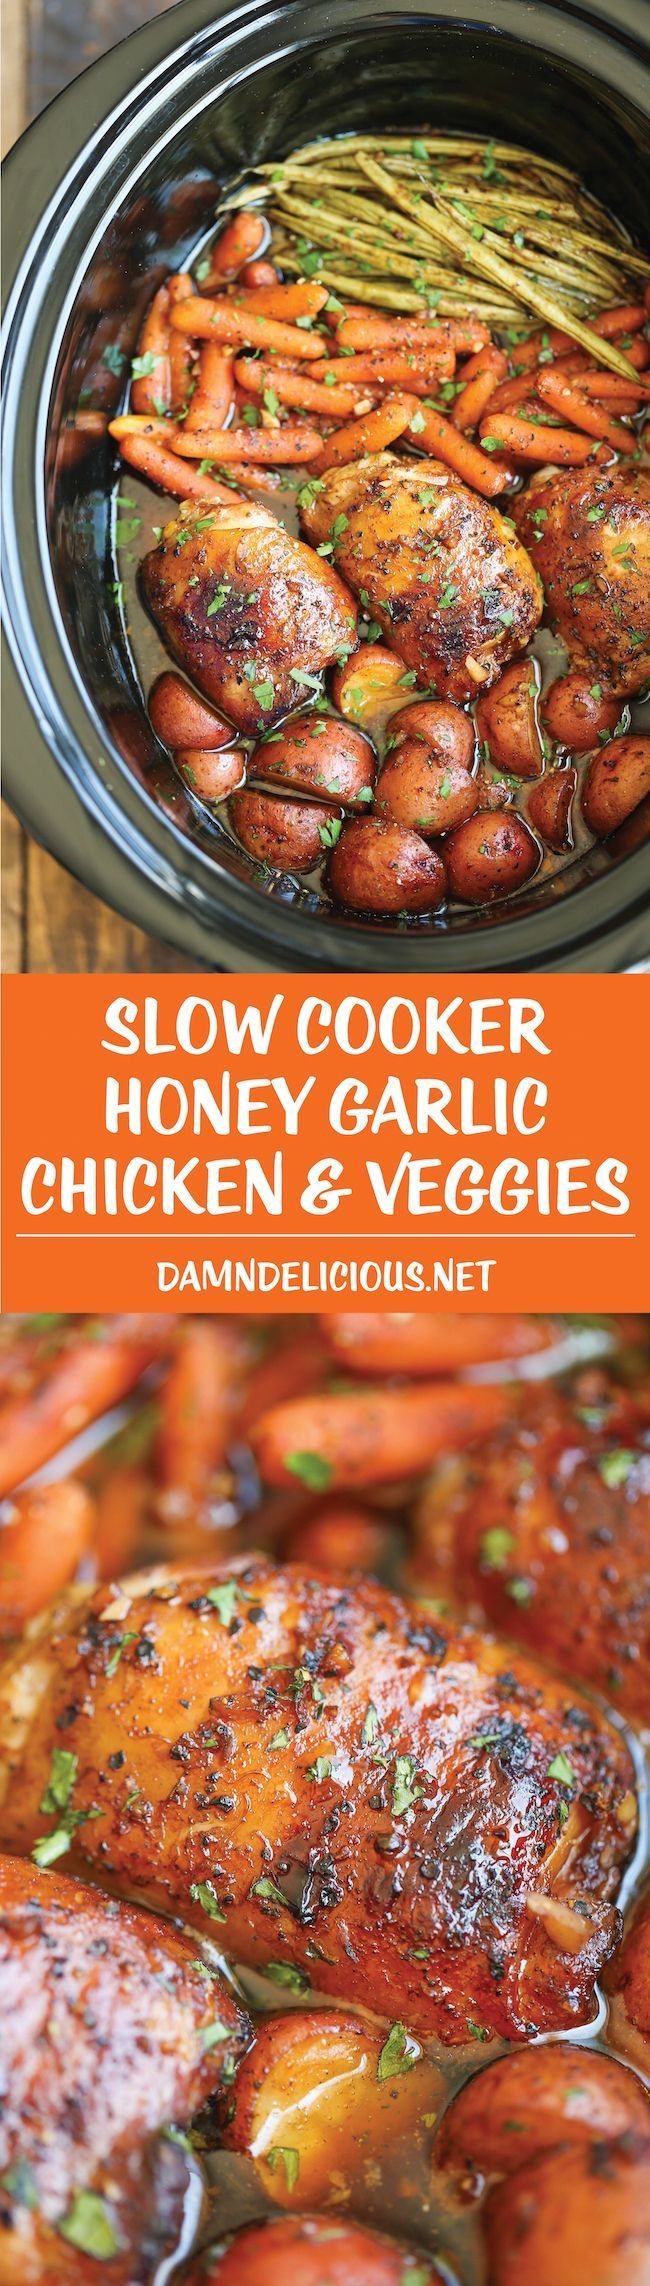 Slow Cooker Honey Garlic Chicken and Veggies – The easiest one pot recipe ever. Simply throw everything in and that’s it! No